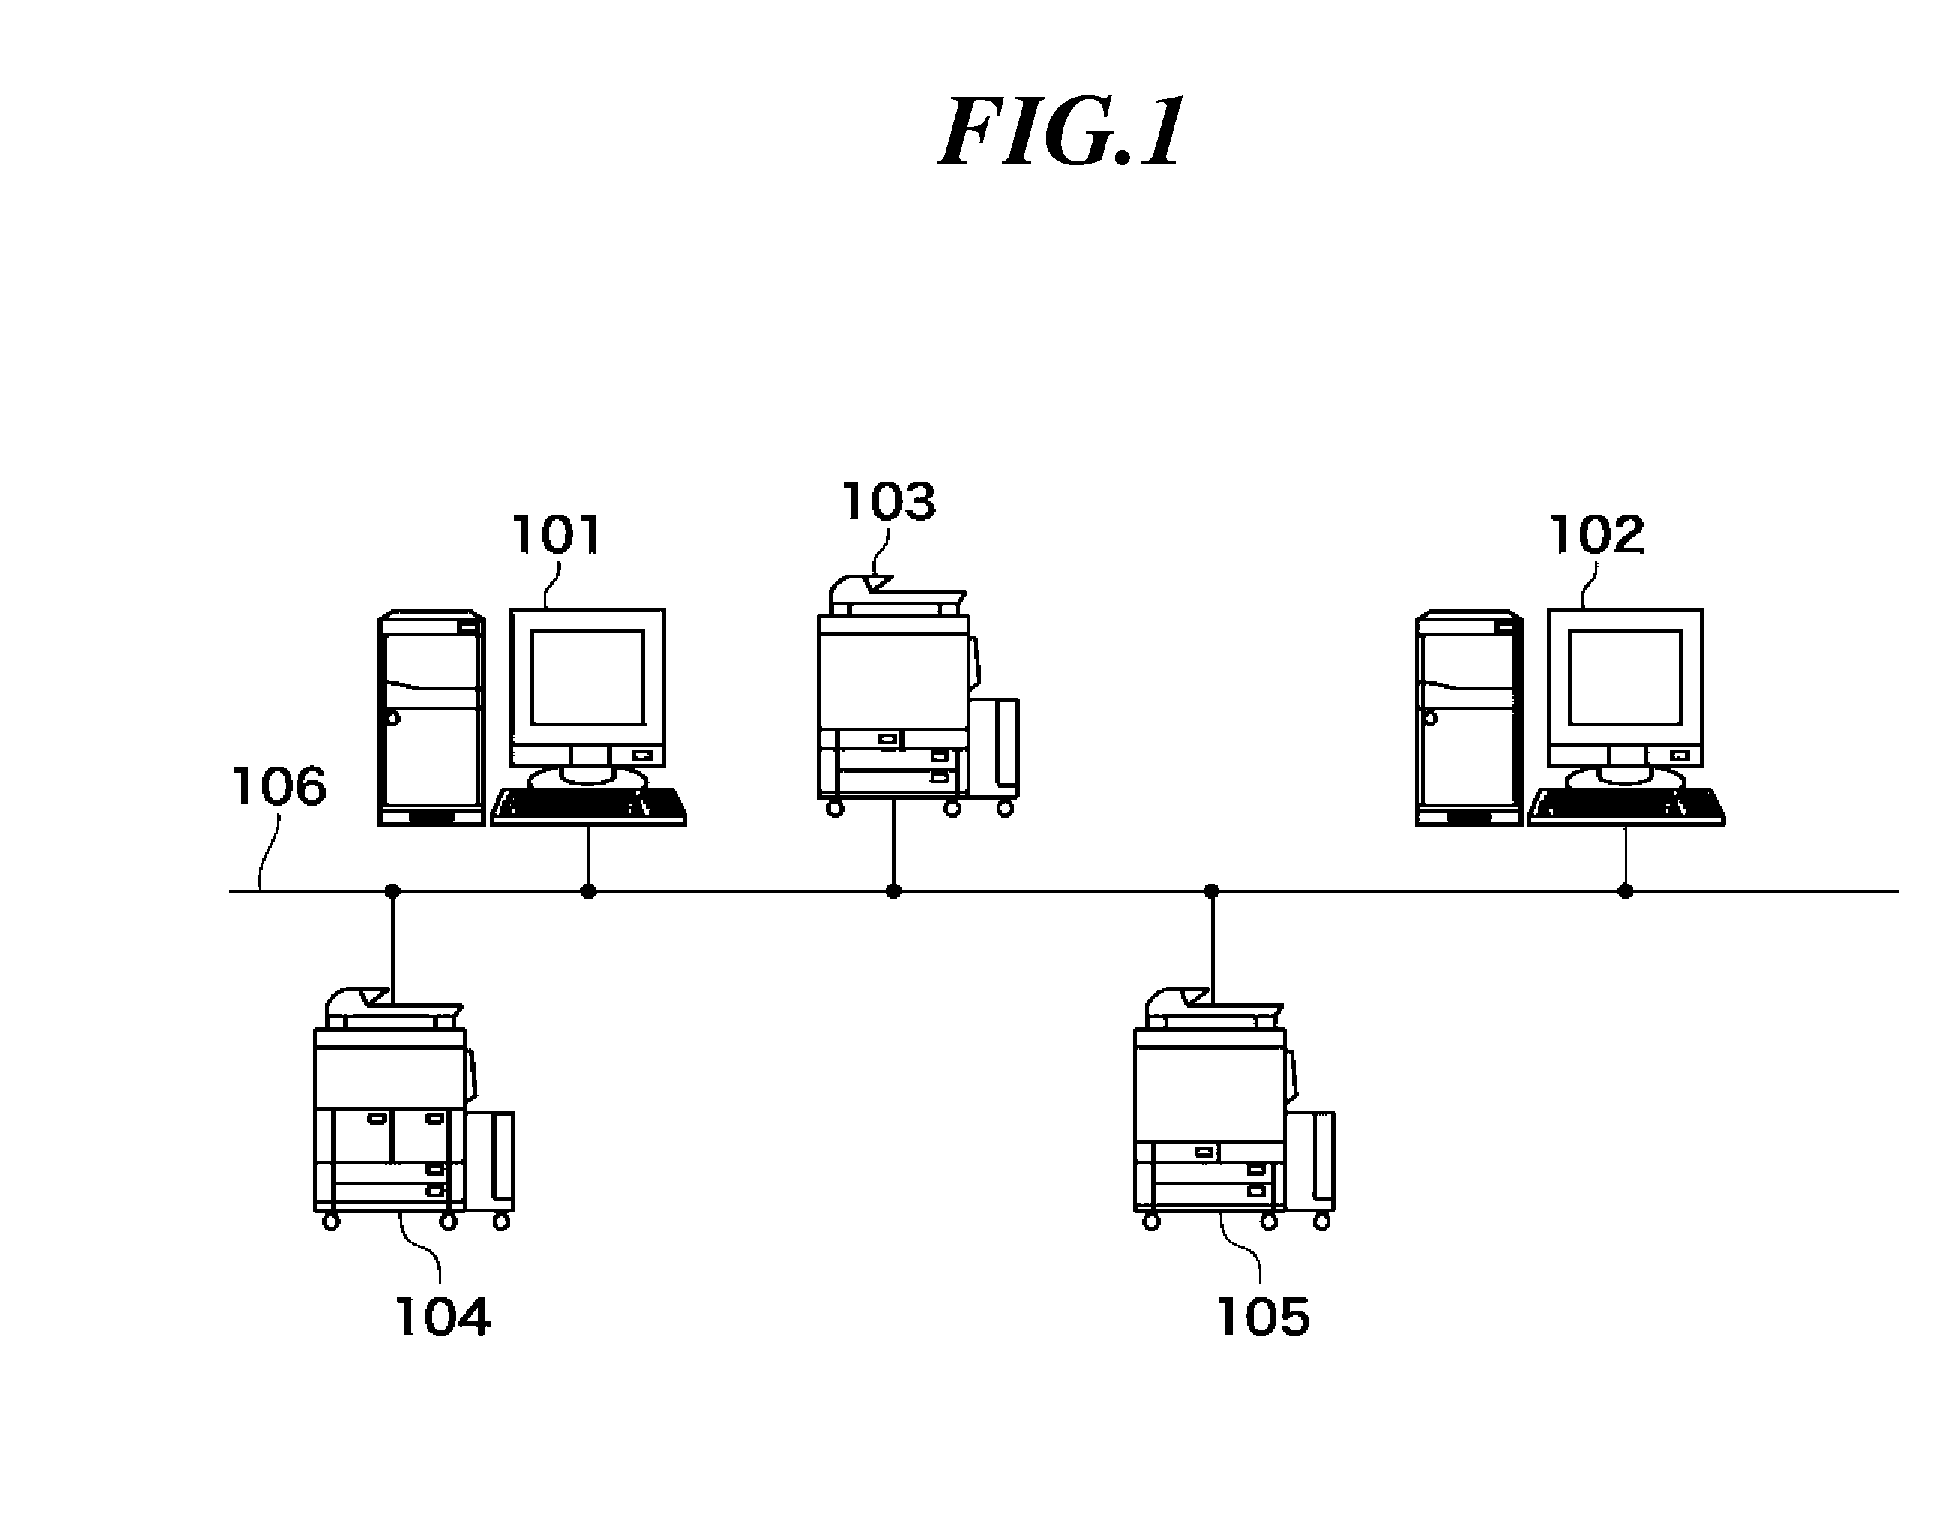 Information processing apparatus for managing address book data, control method therefor, and storage medium storing control program therefor